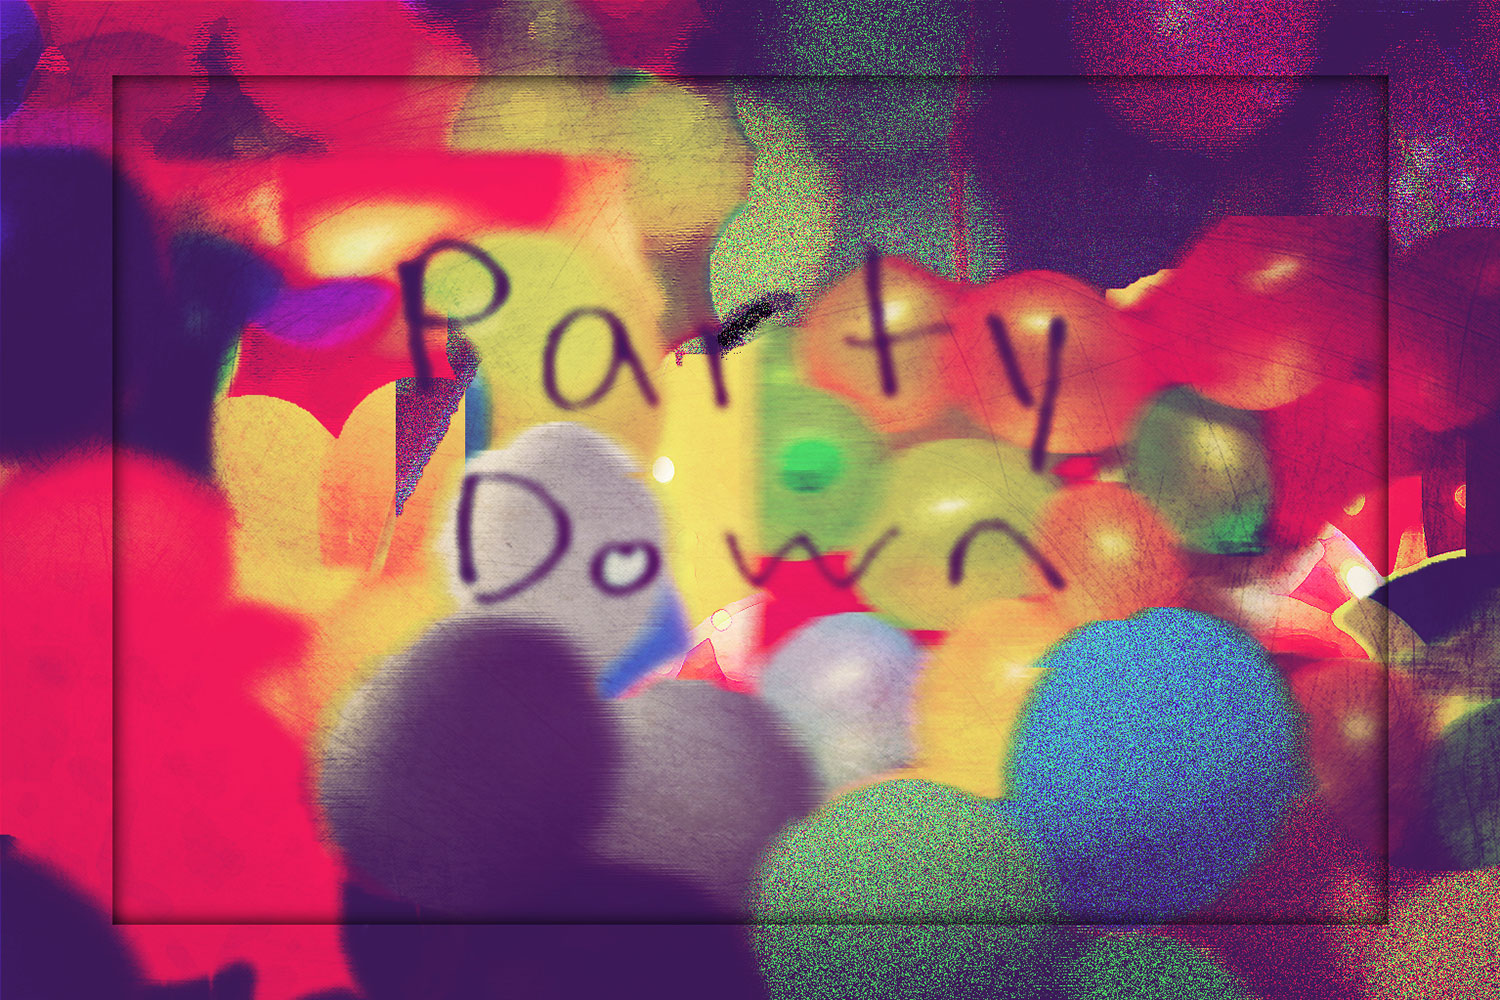 Shormey - Party Down